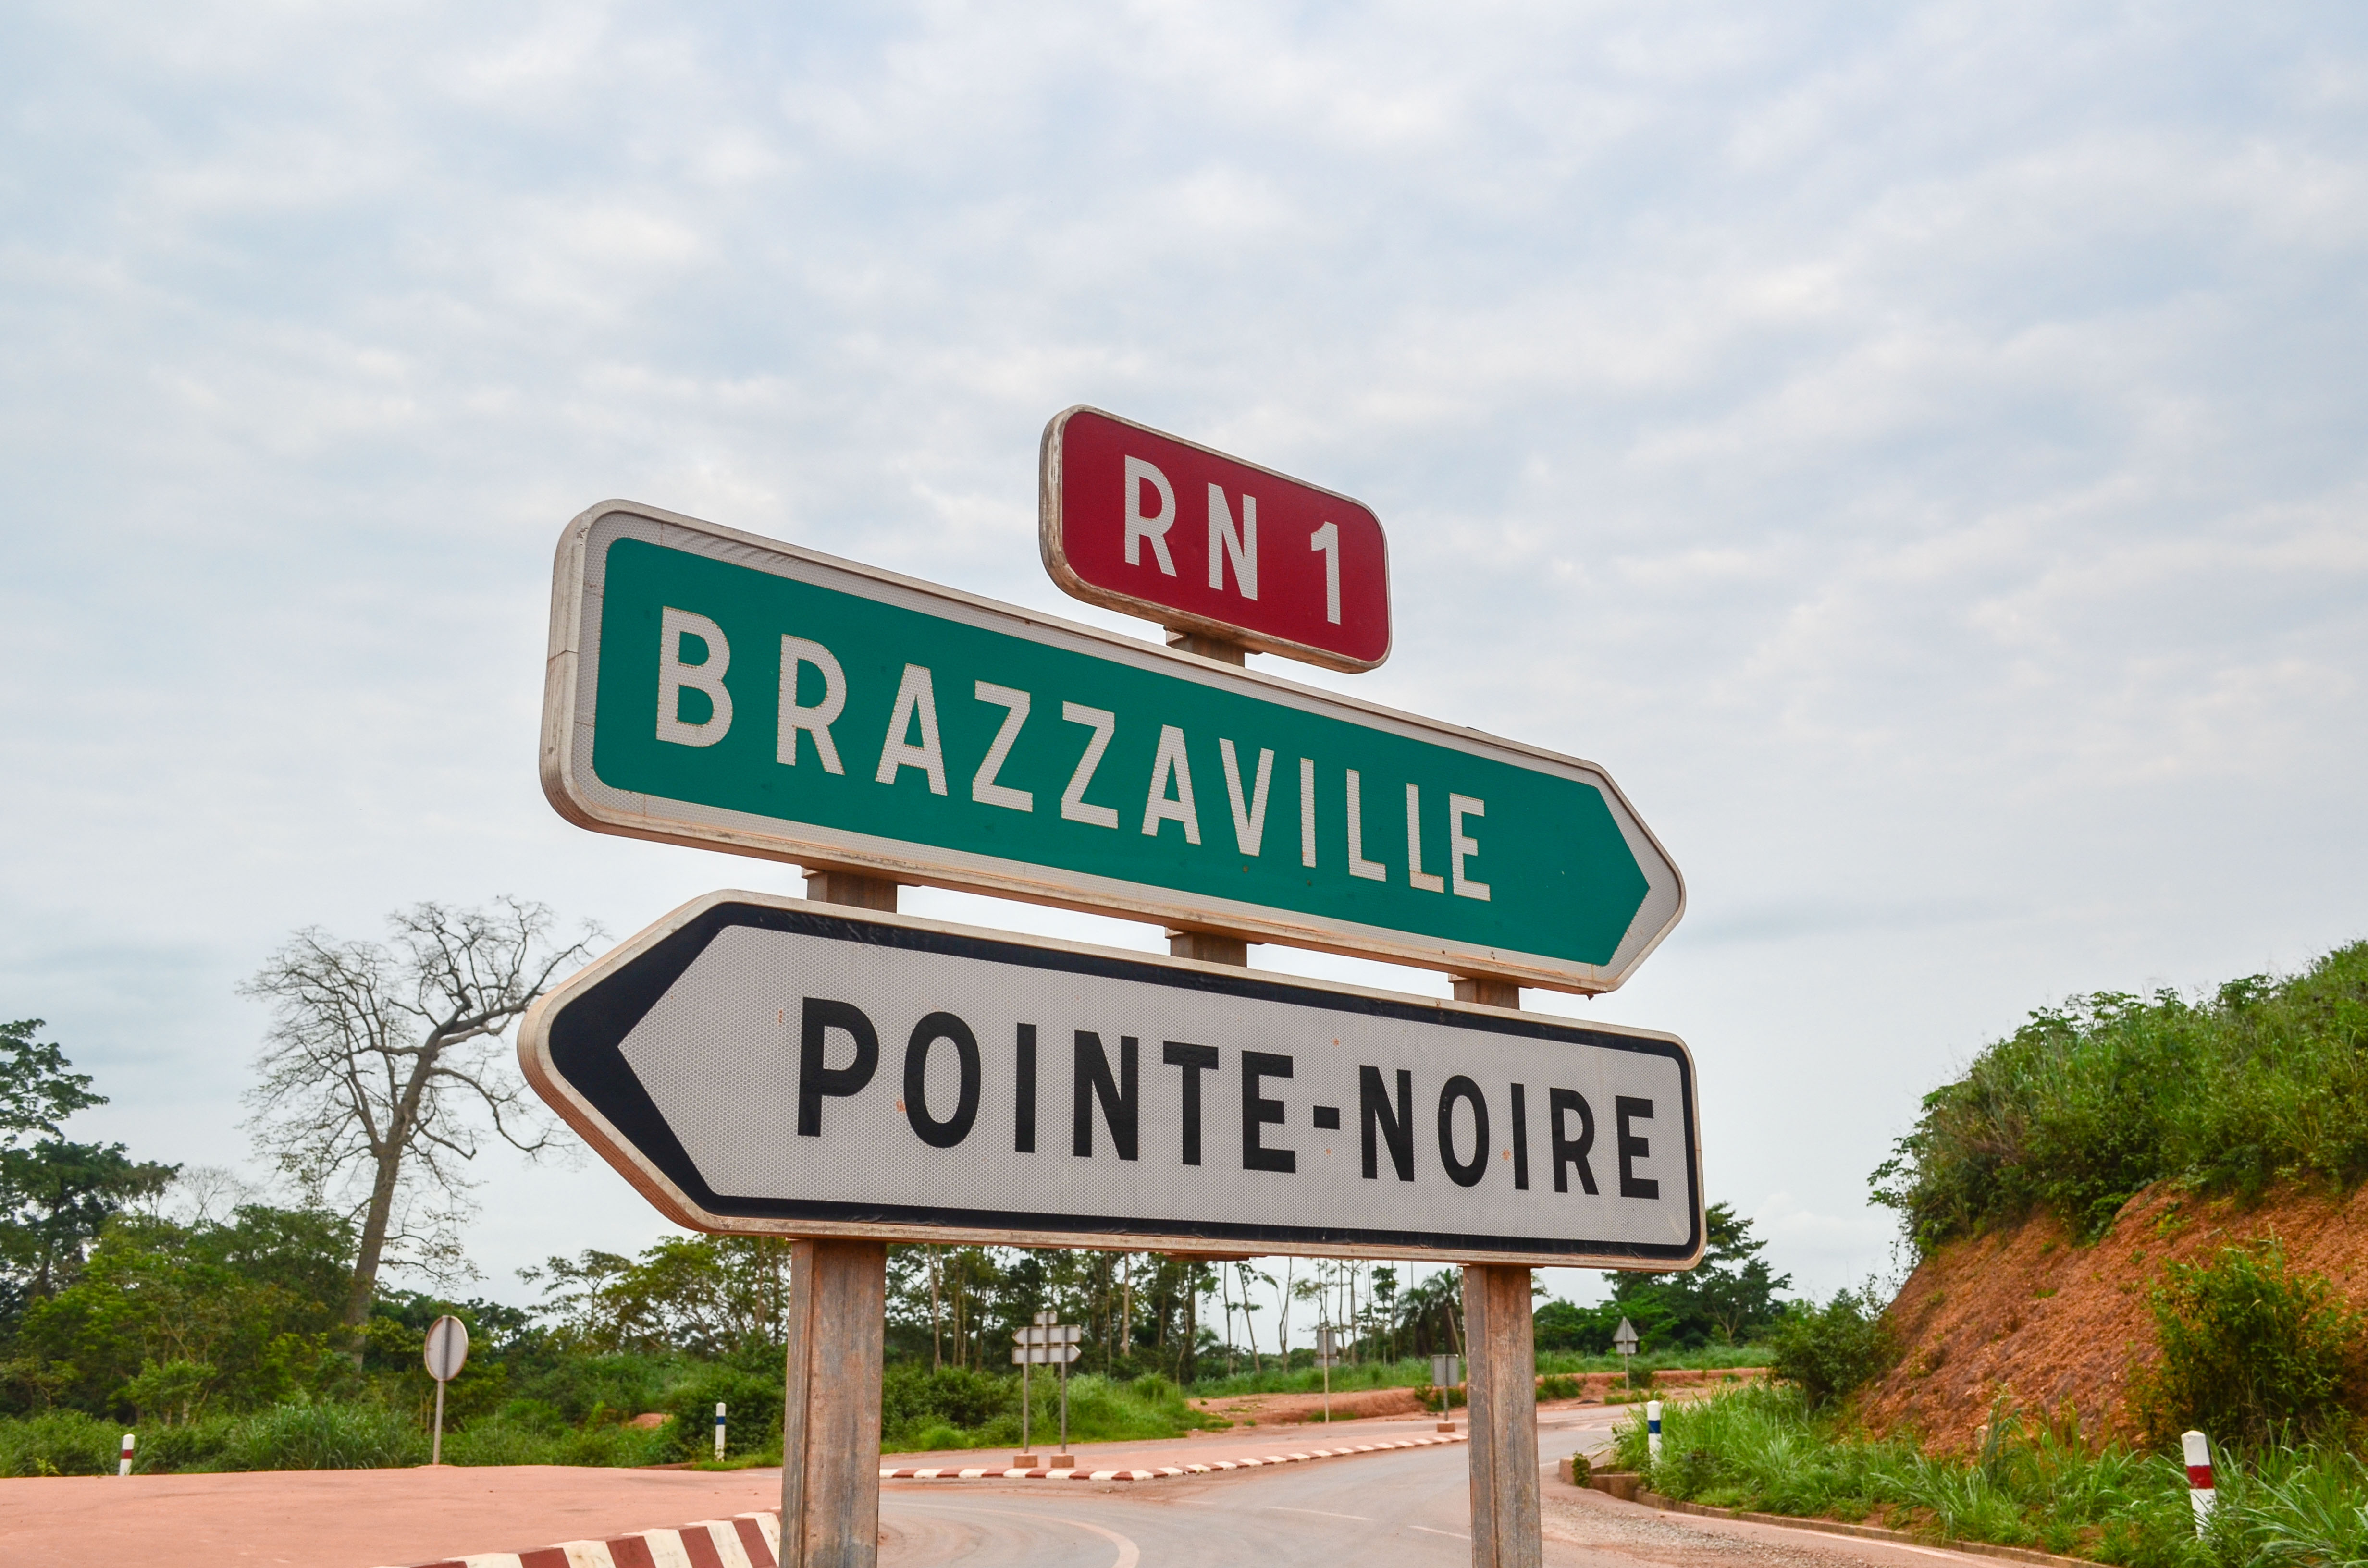 National Road 1 in the Republic of Congo, photography by jbdodane (CC BY-NC 2.0)